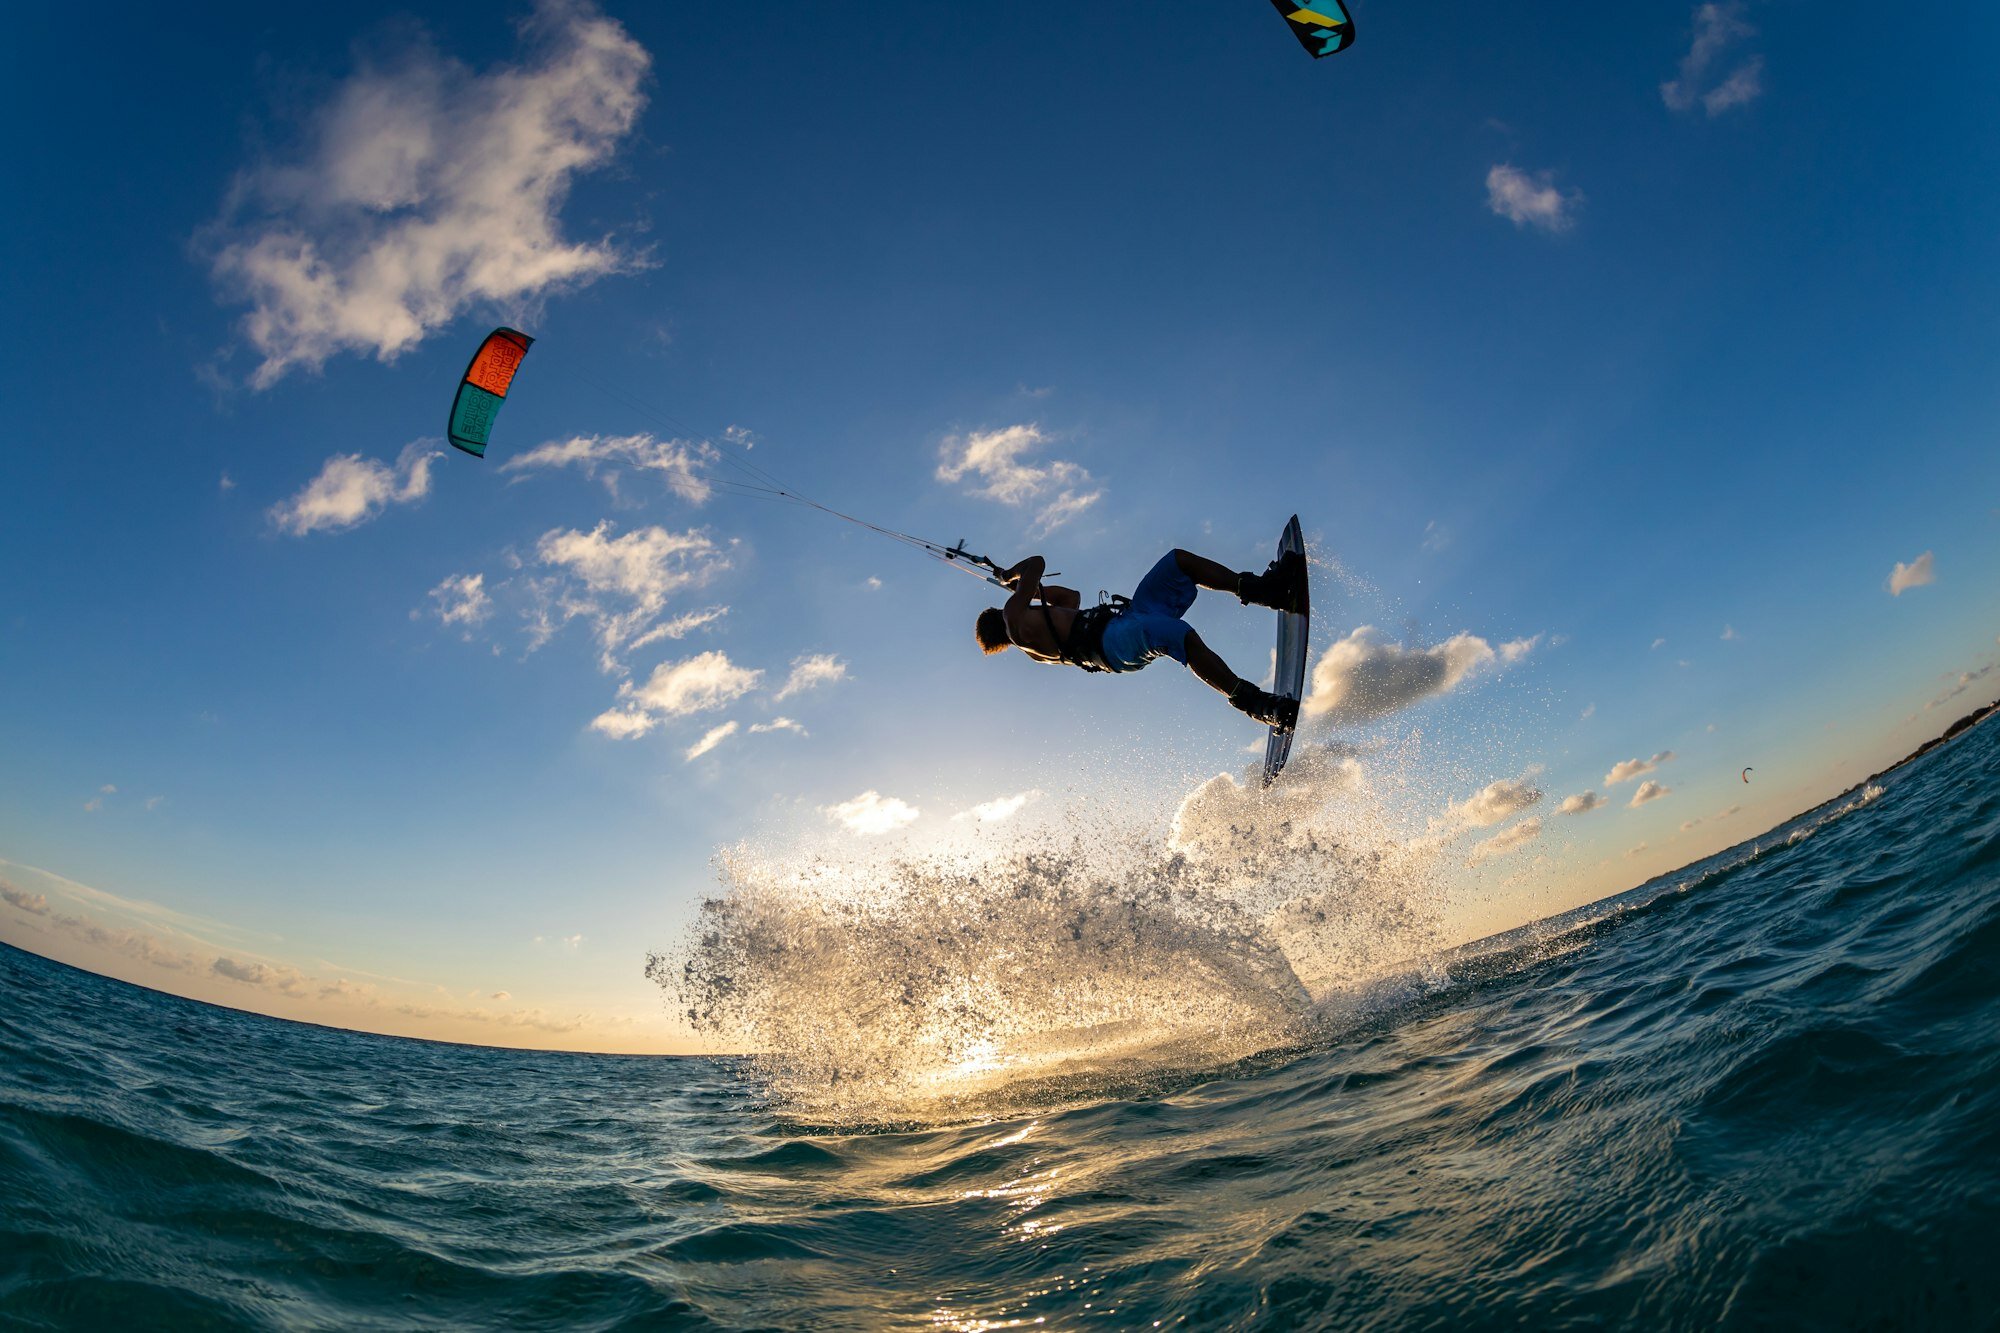 Person surfing and flying a parachute at the same time in Kitesurfing. Bonaire, Caribbean